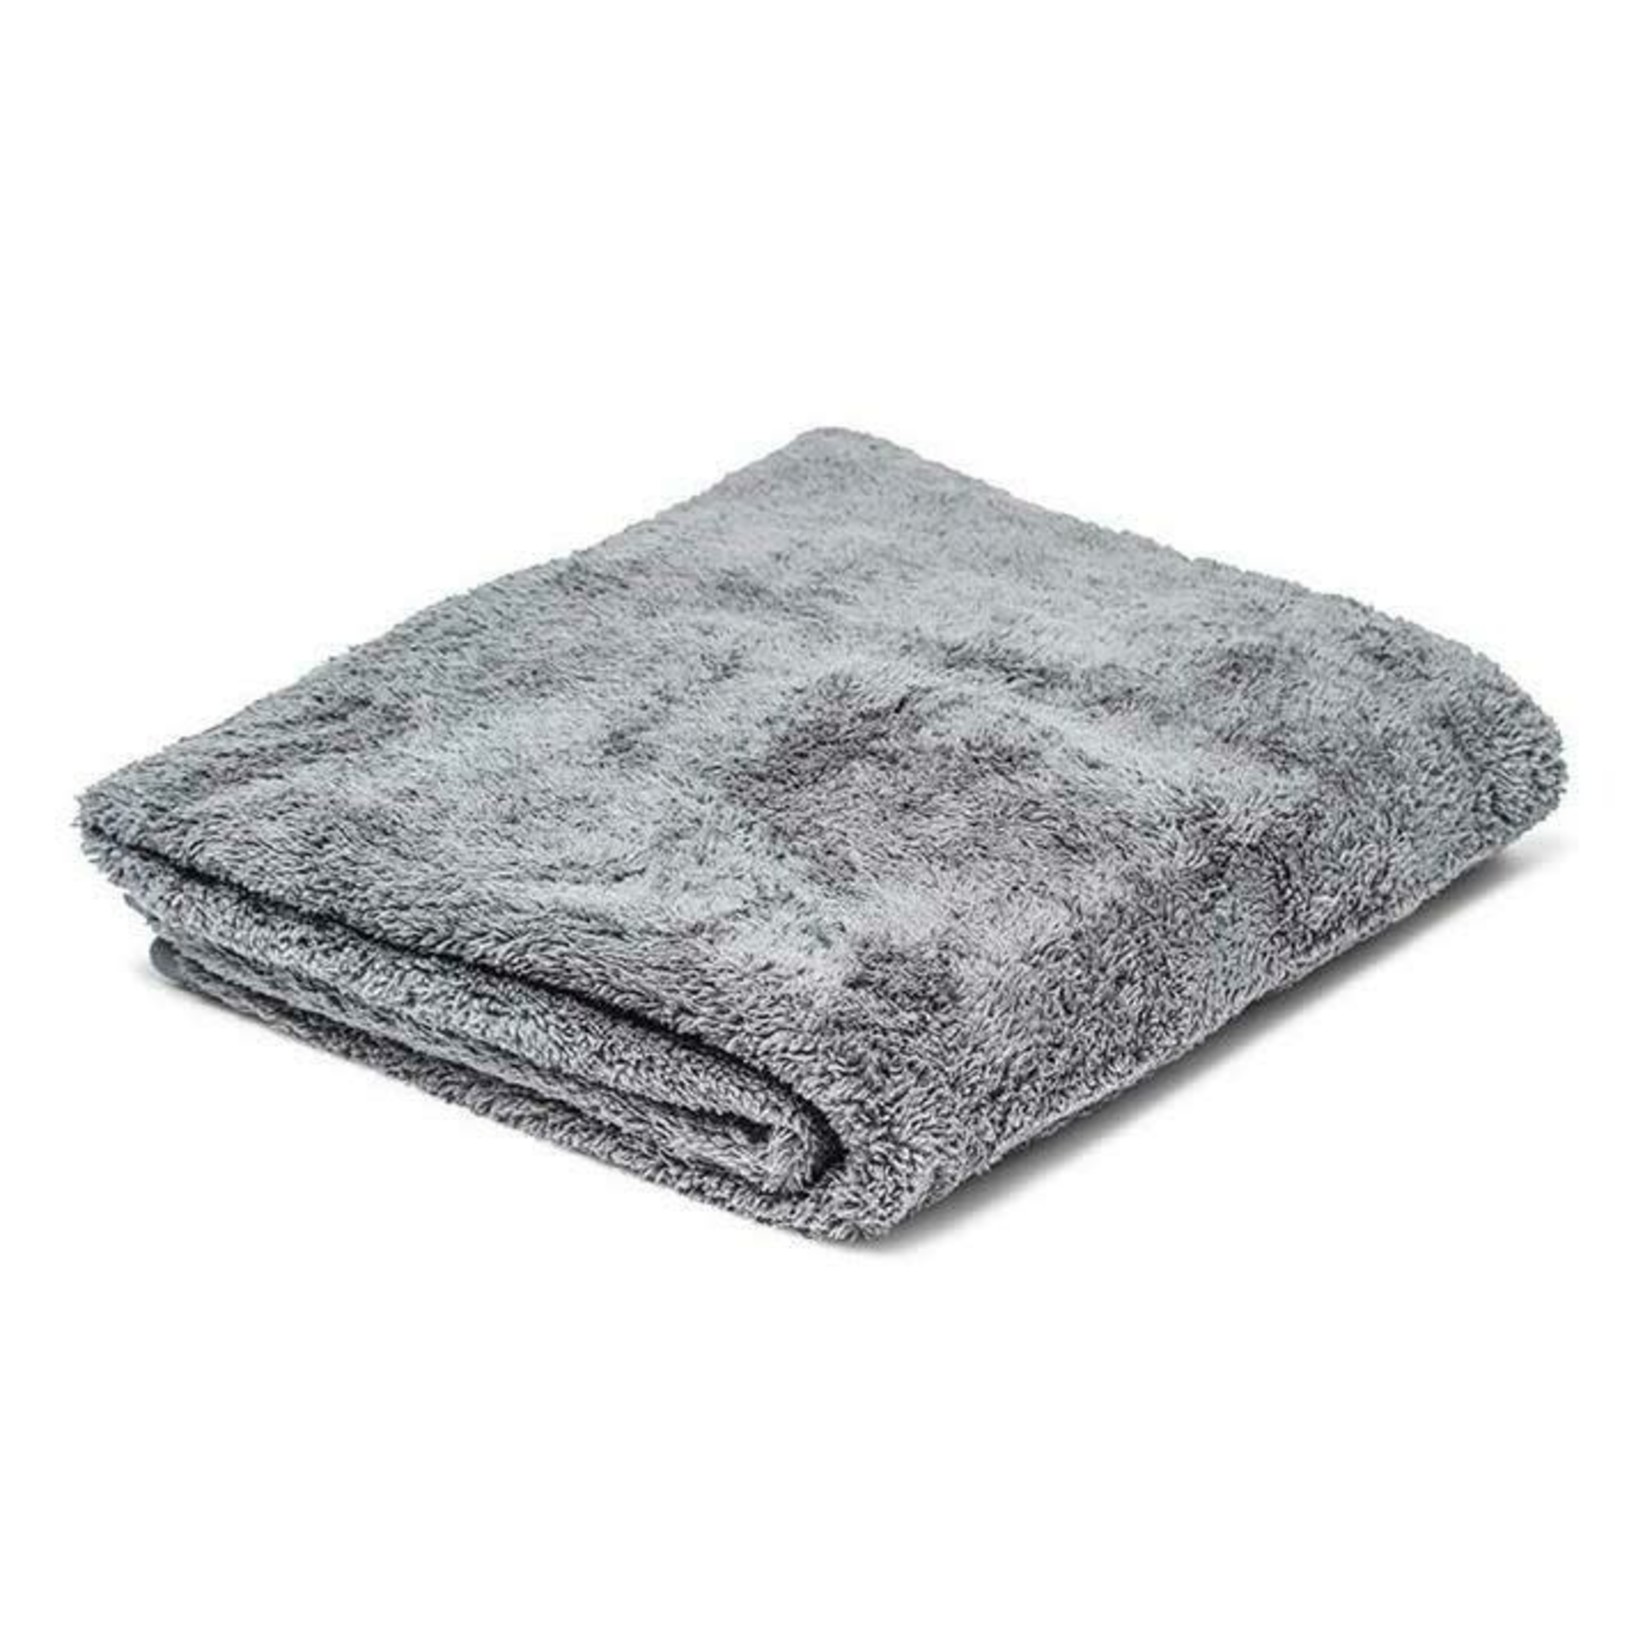 Messy Mutts Messy Mutts: Deluxe Microfibre Towel